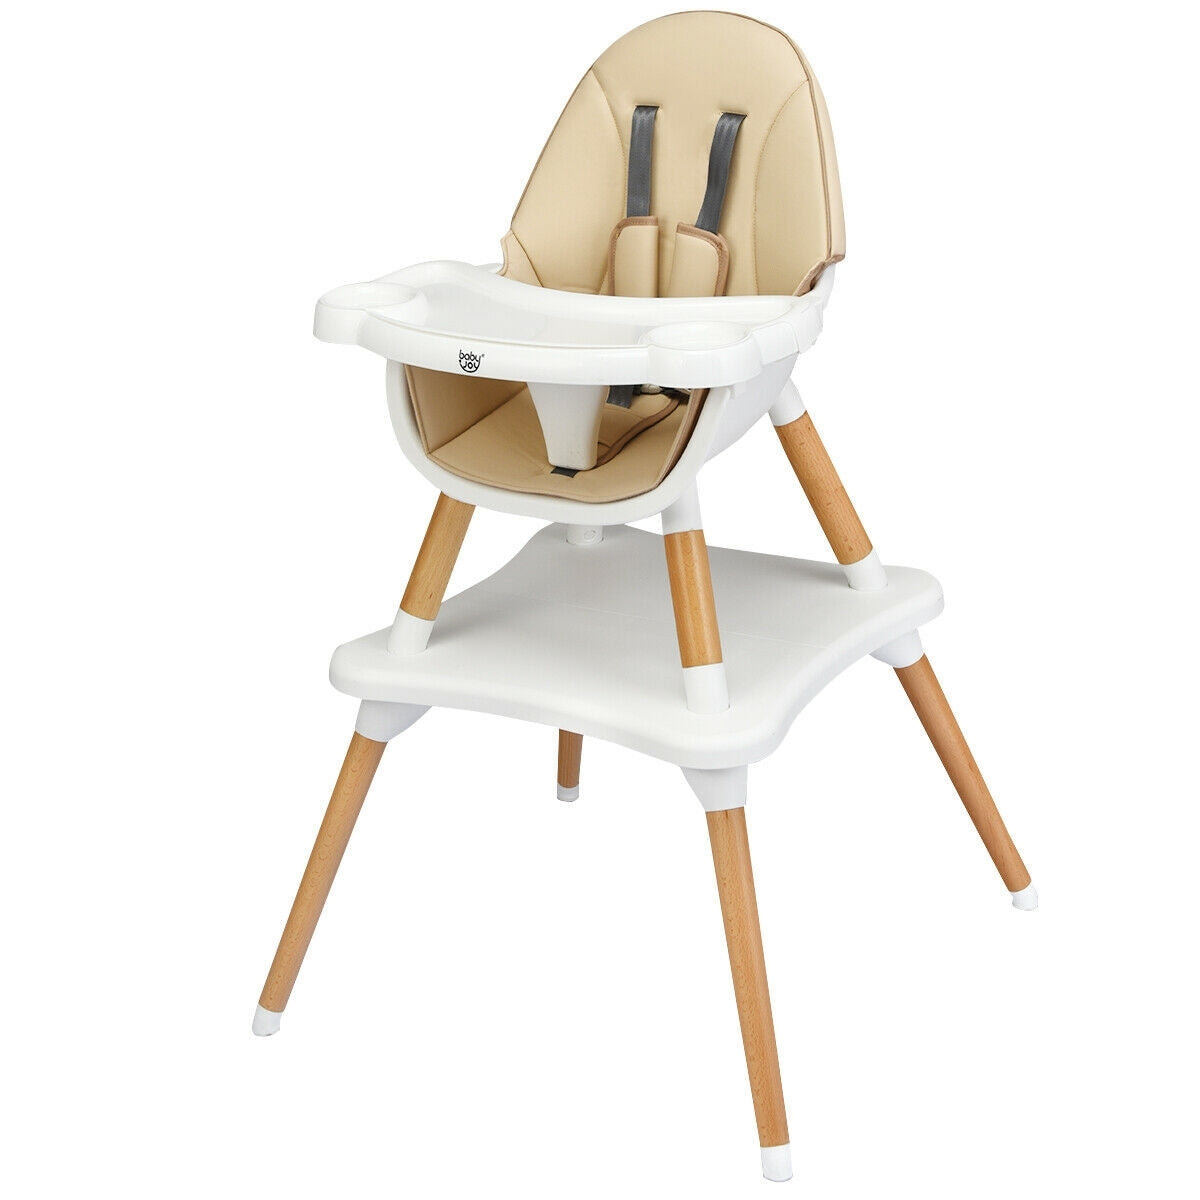 5-in-1 Baby Wooden Convertible High Chair -Khaki - Color: Beige